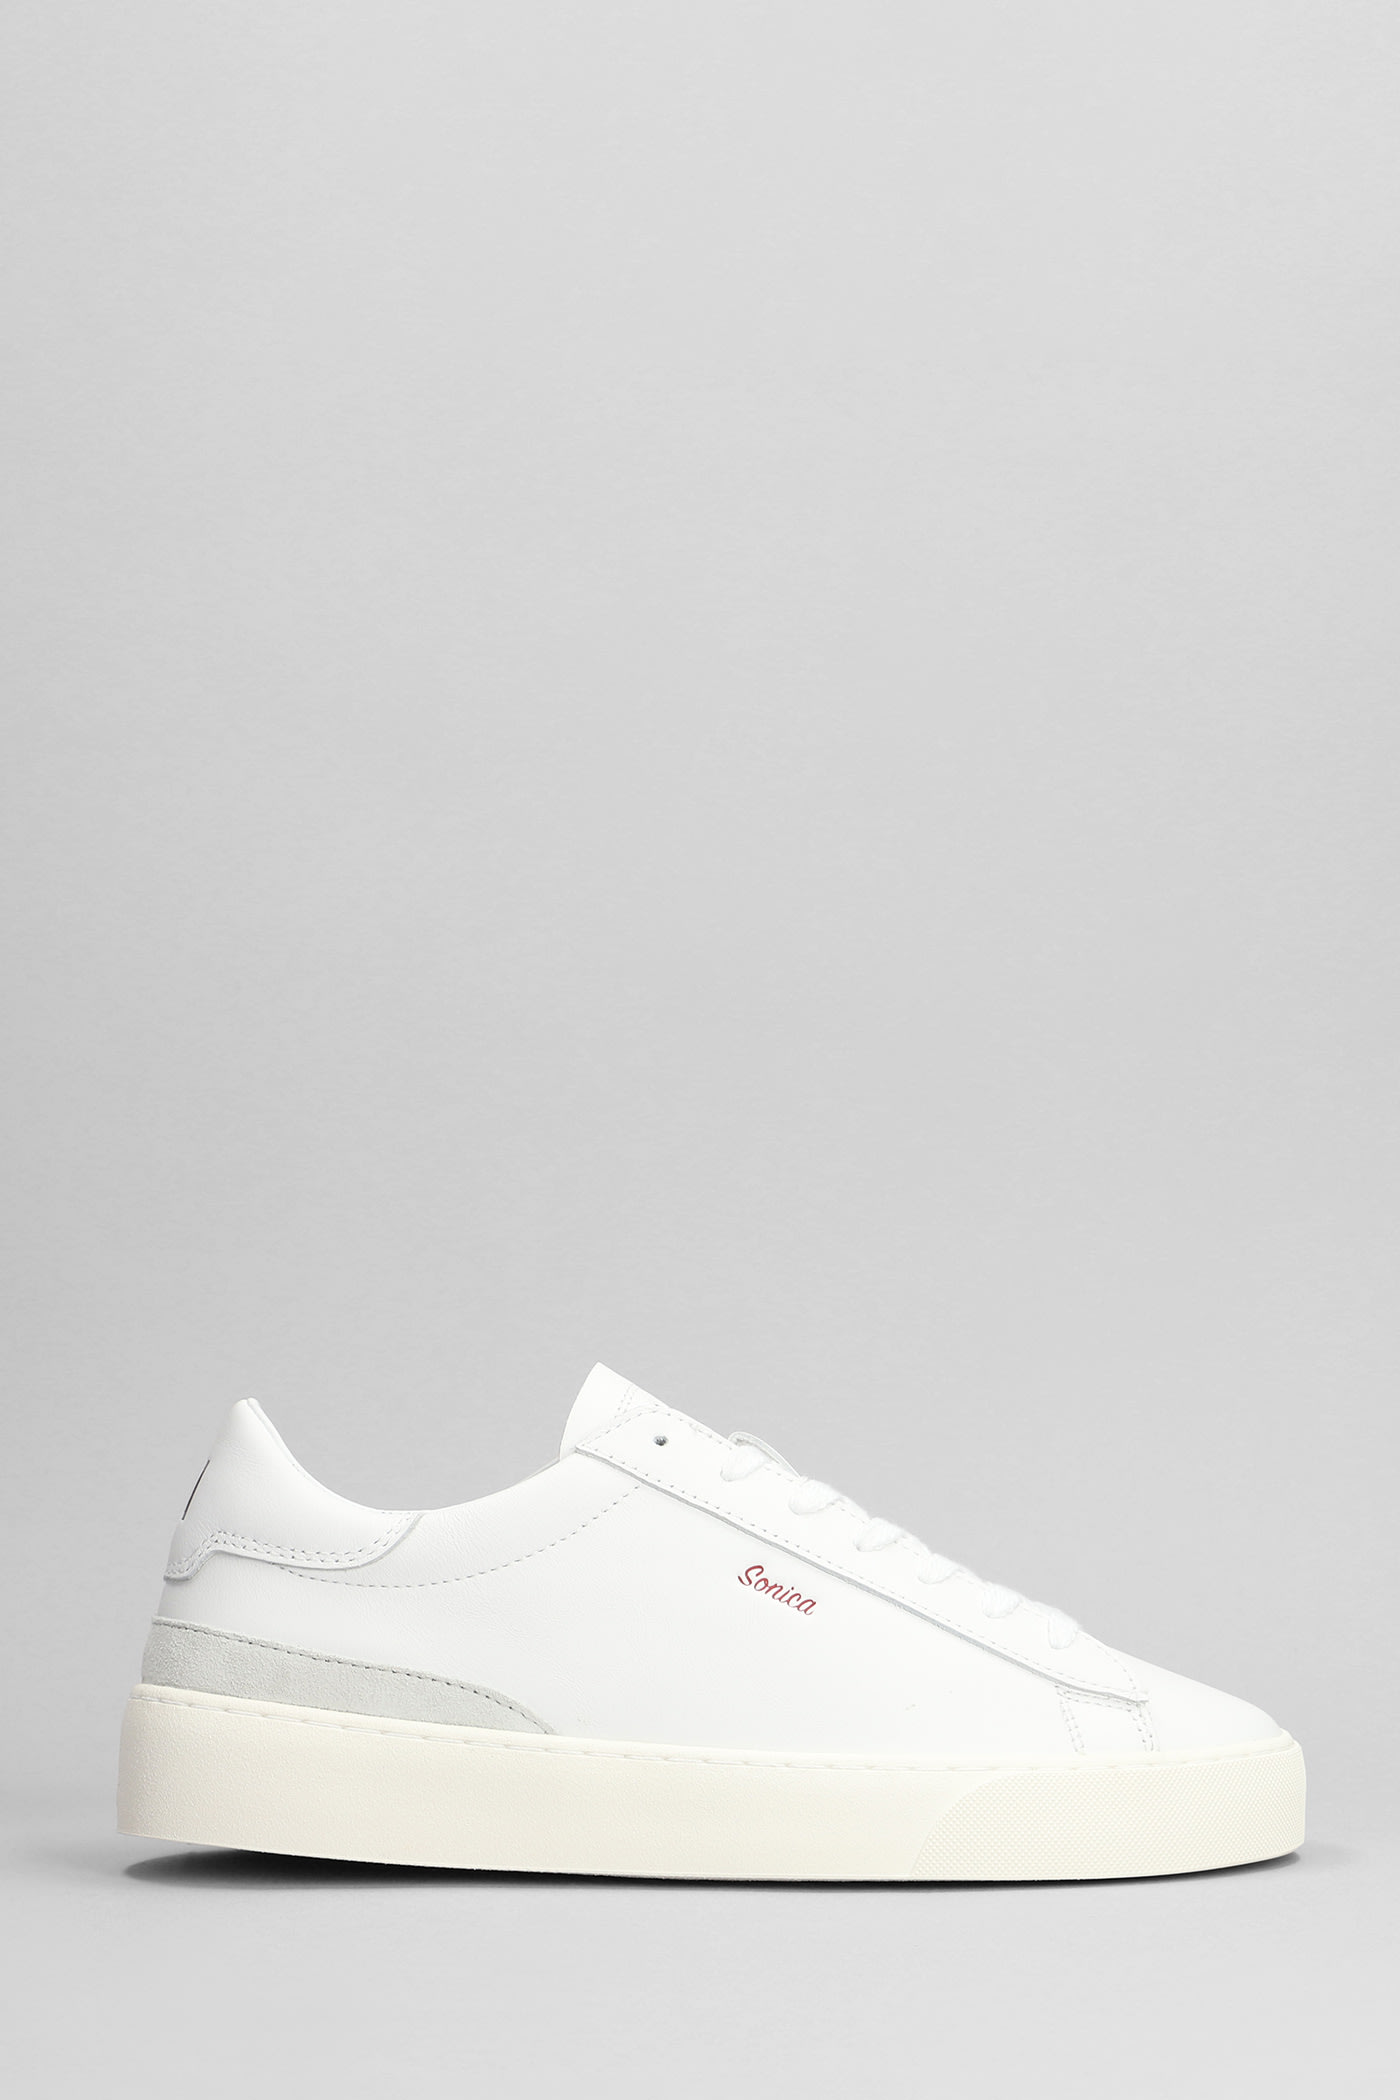 DATE SONICA SNEAKERS IN WHITE LEATHER